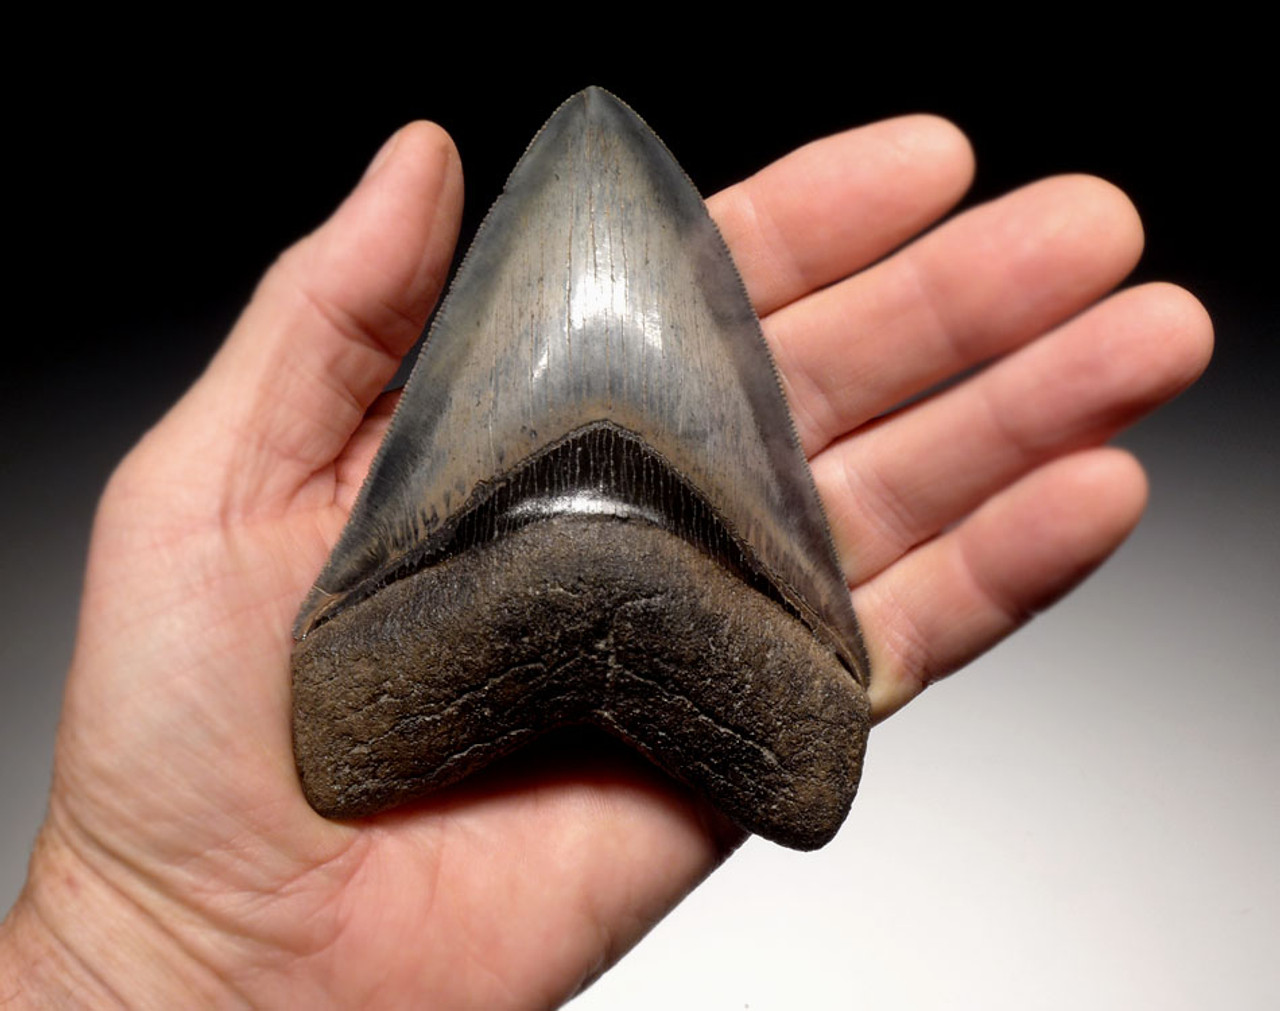 SH6-335 - FINEST GRADE 4.7 INCH MEGALODON TOOTH WITH BLUE-GRAY AND CREAM CHATOYANT ENAMEL